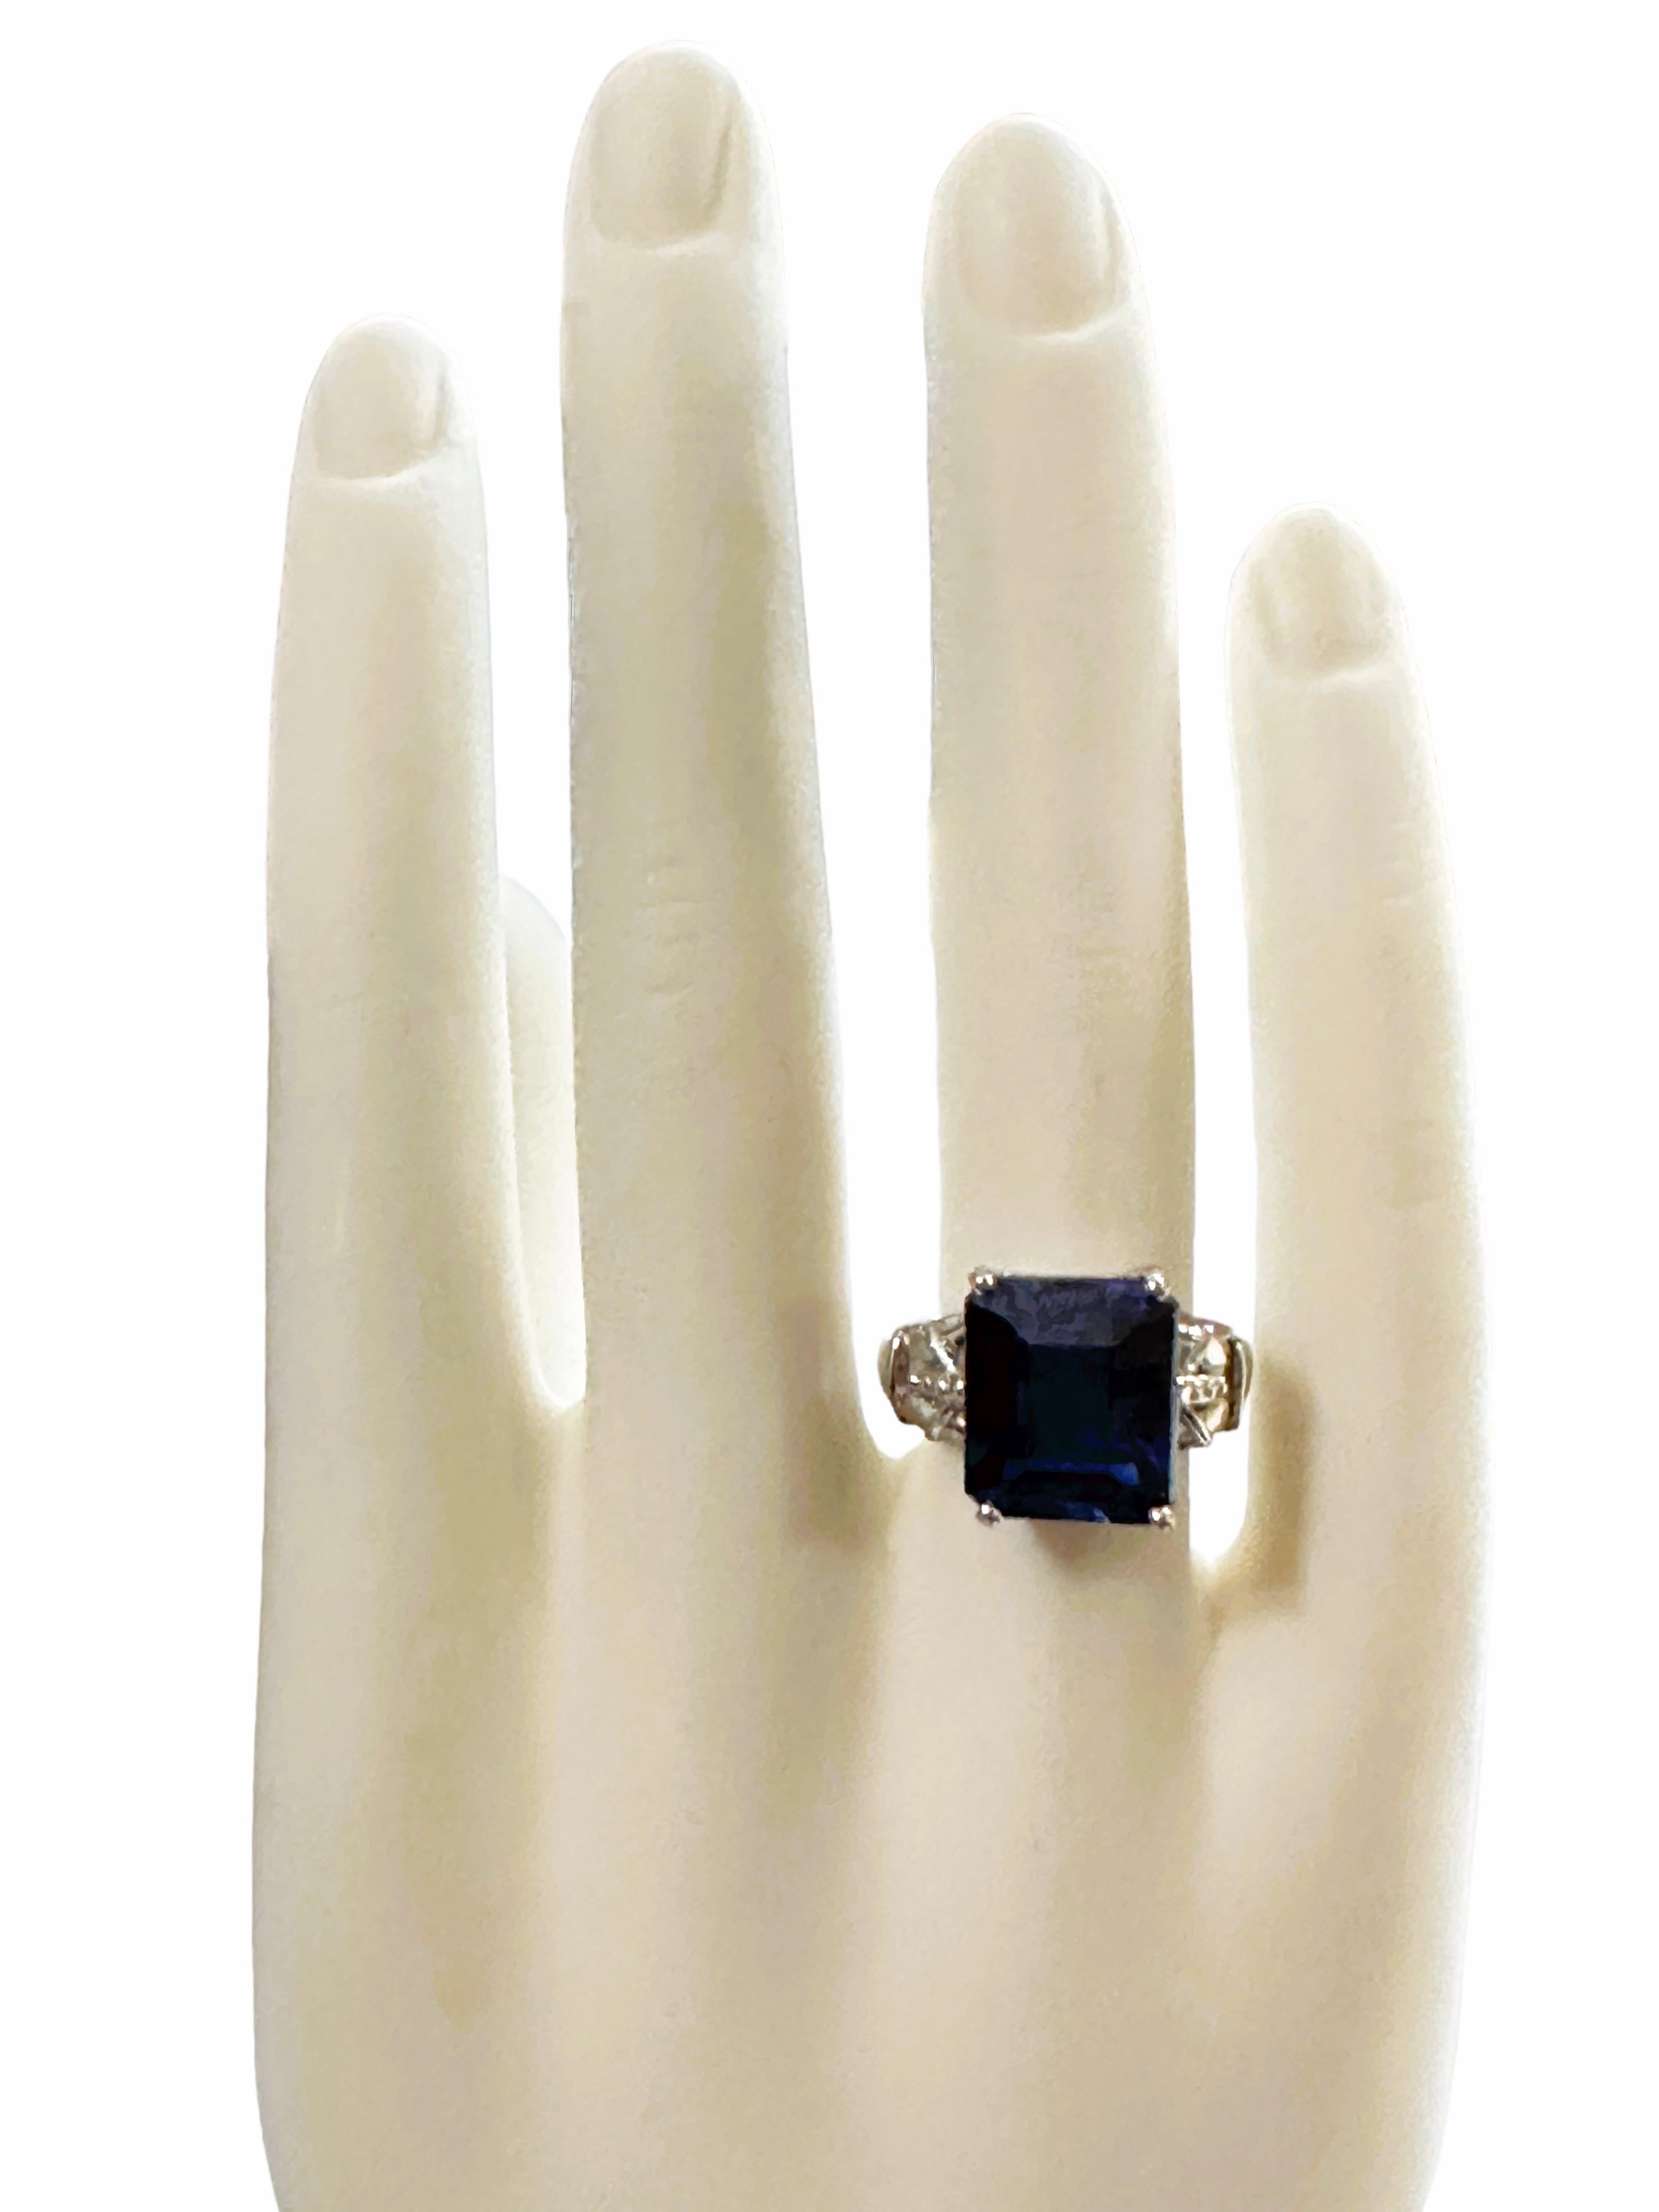 New African IF 10.20 Ct Deep Blue Sapphire Sterling Ring Size 6.25 1